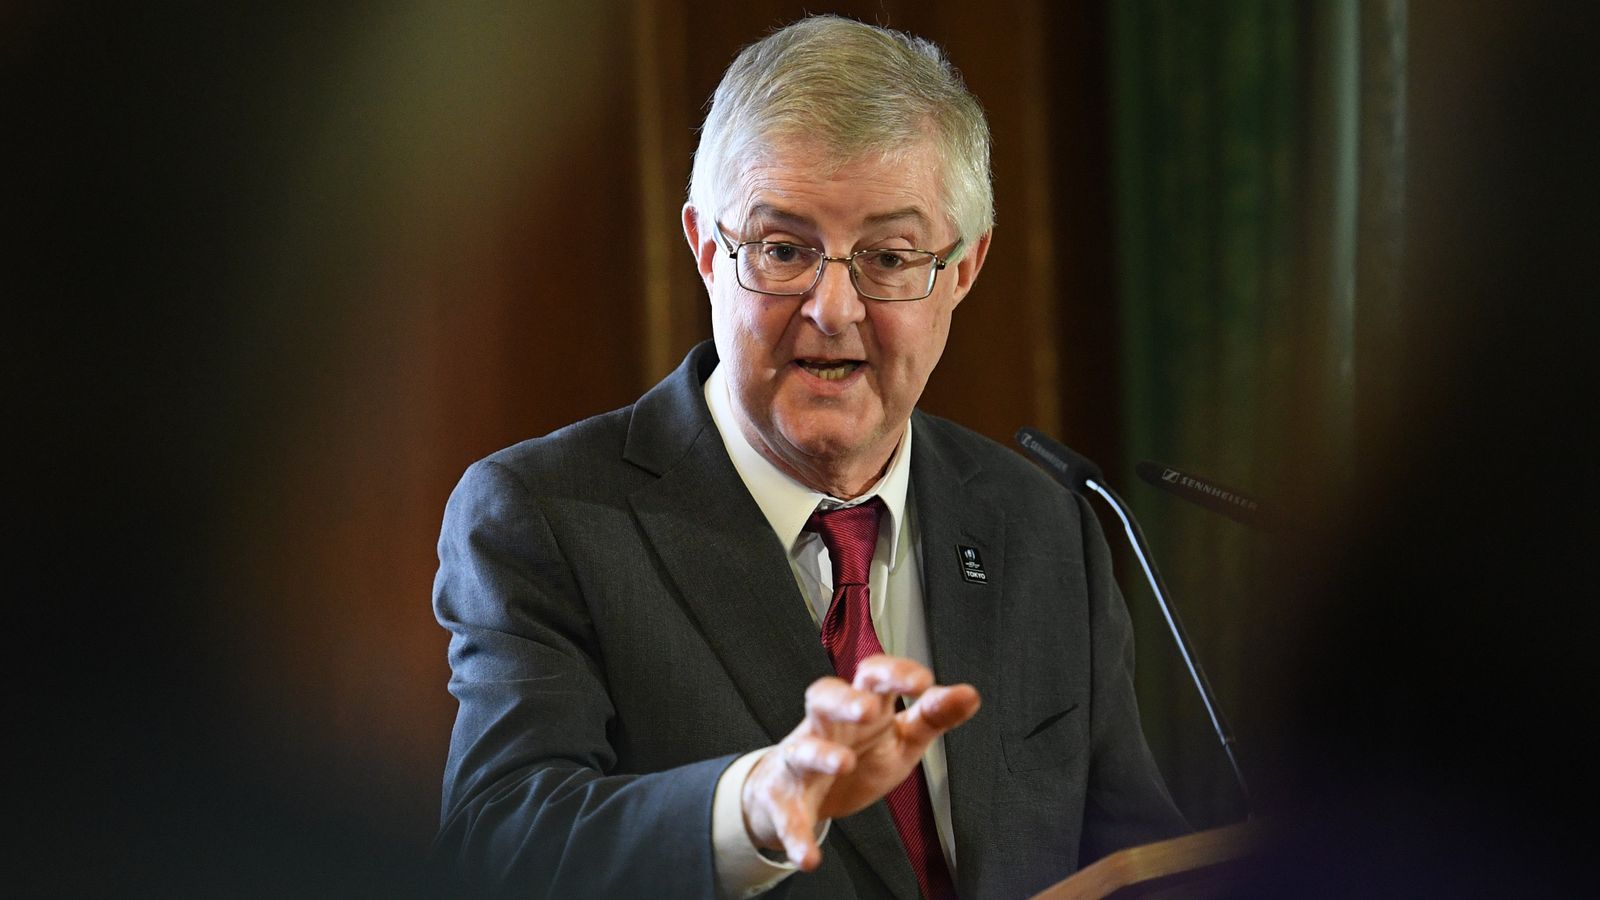 Mark Drakeford: First minister of Wales announces resignation